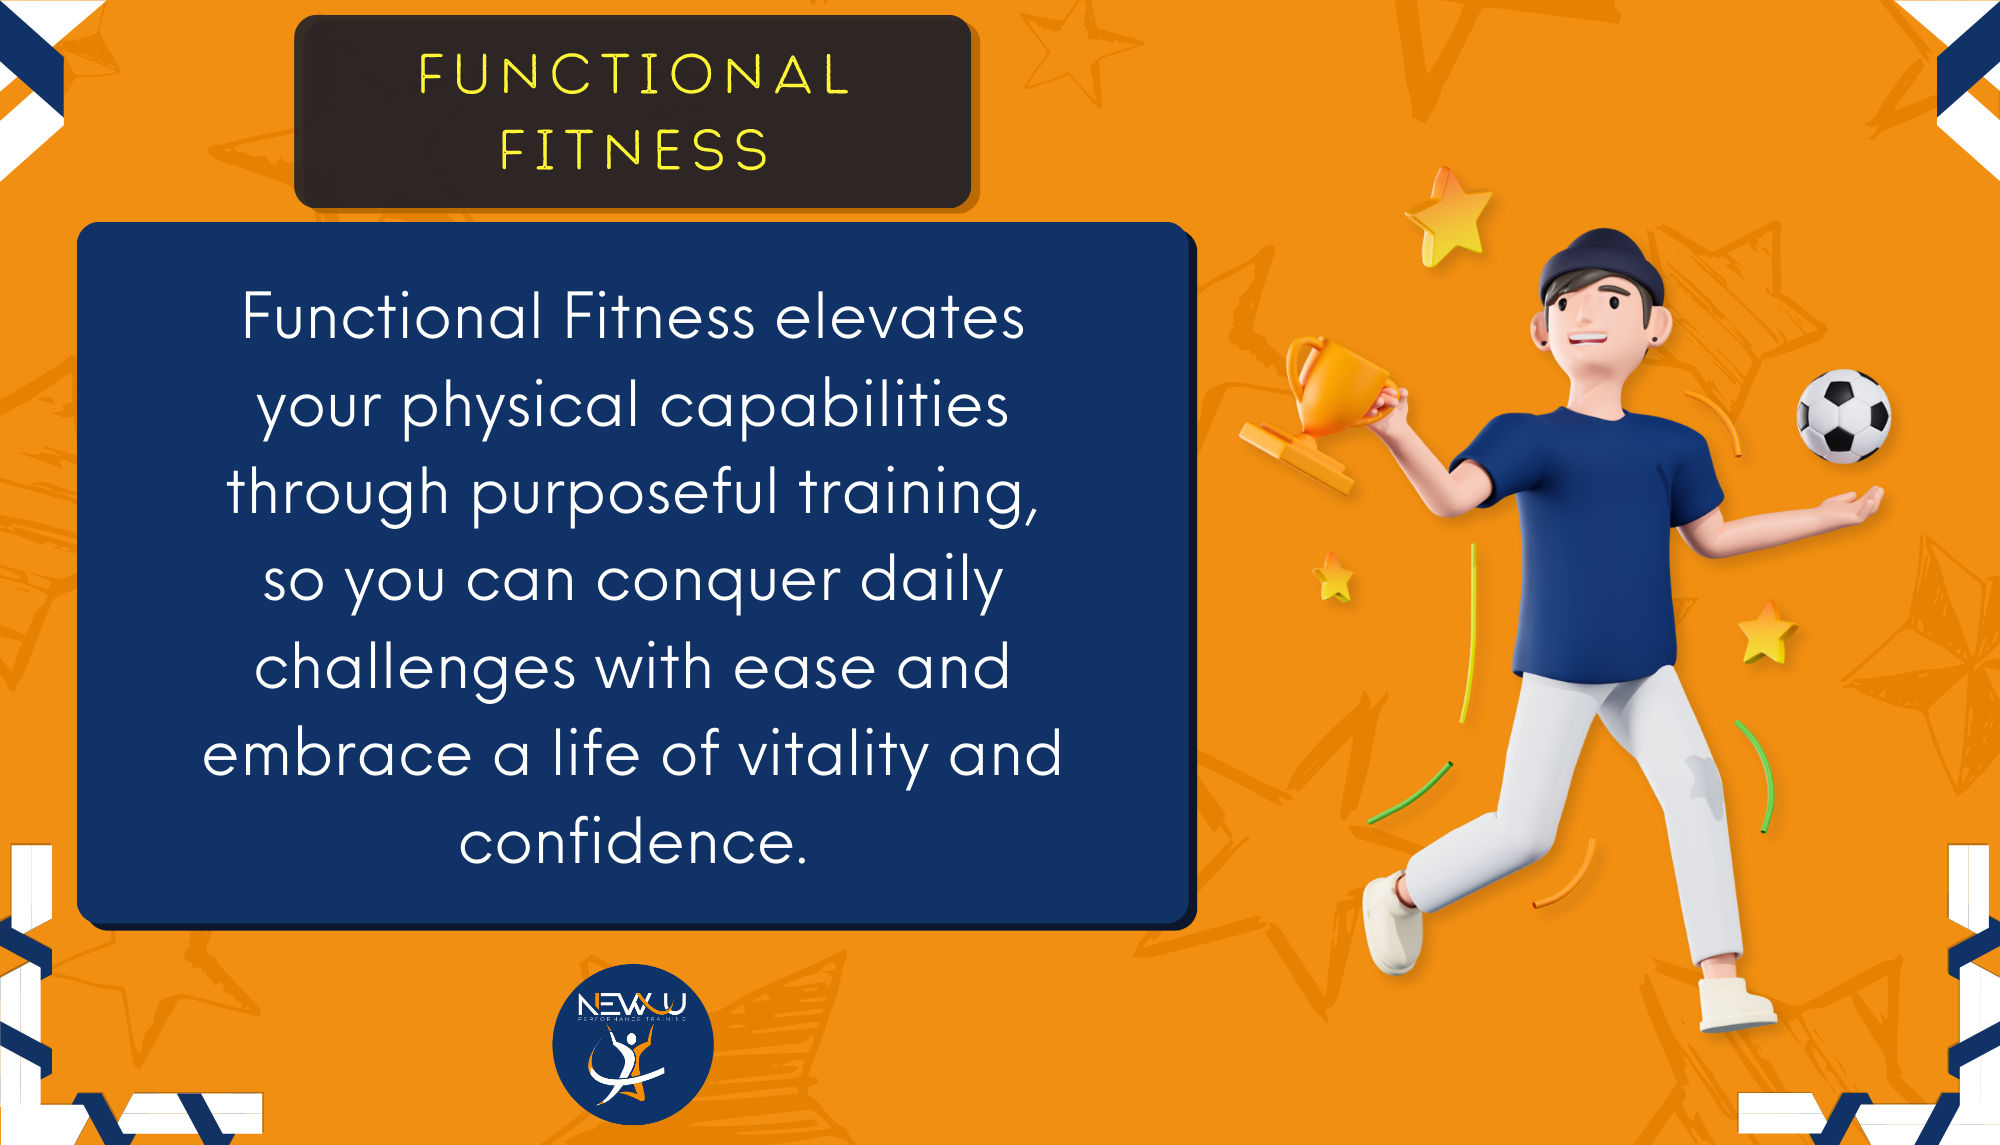 What is meant by functional fitness?